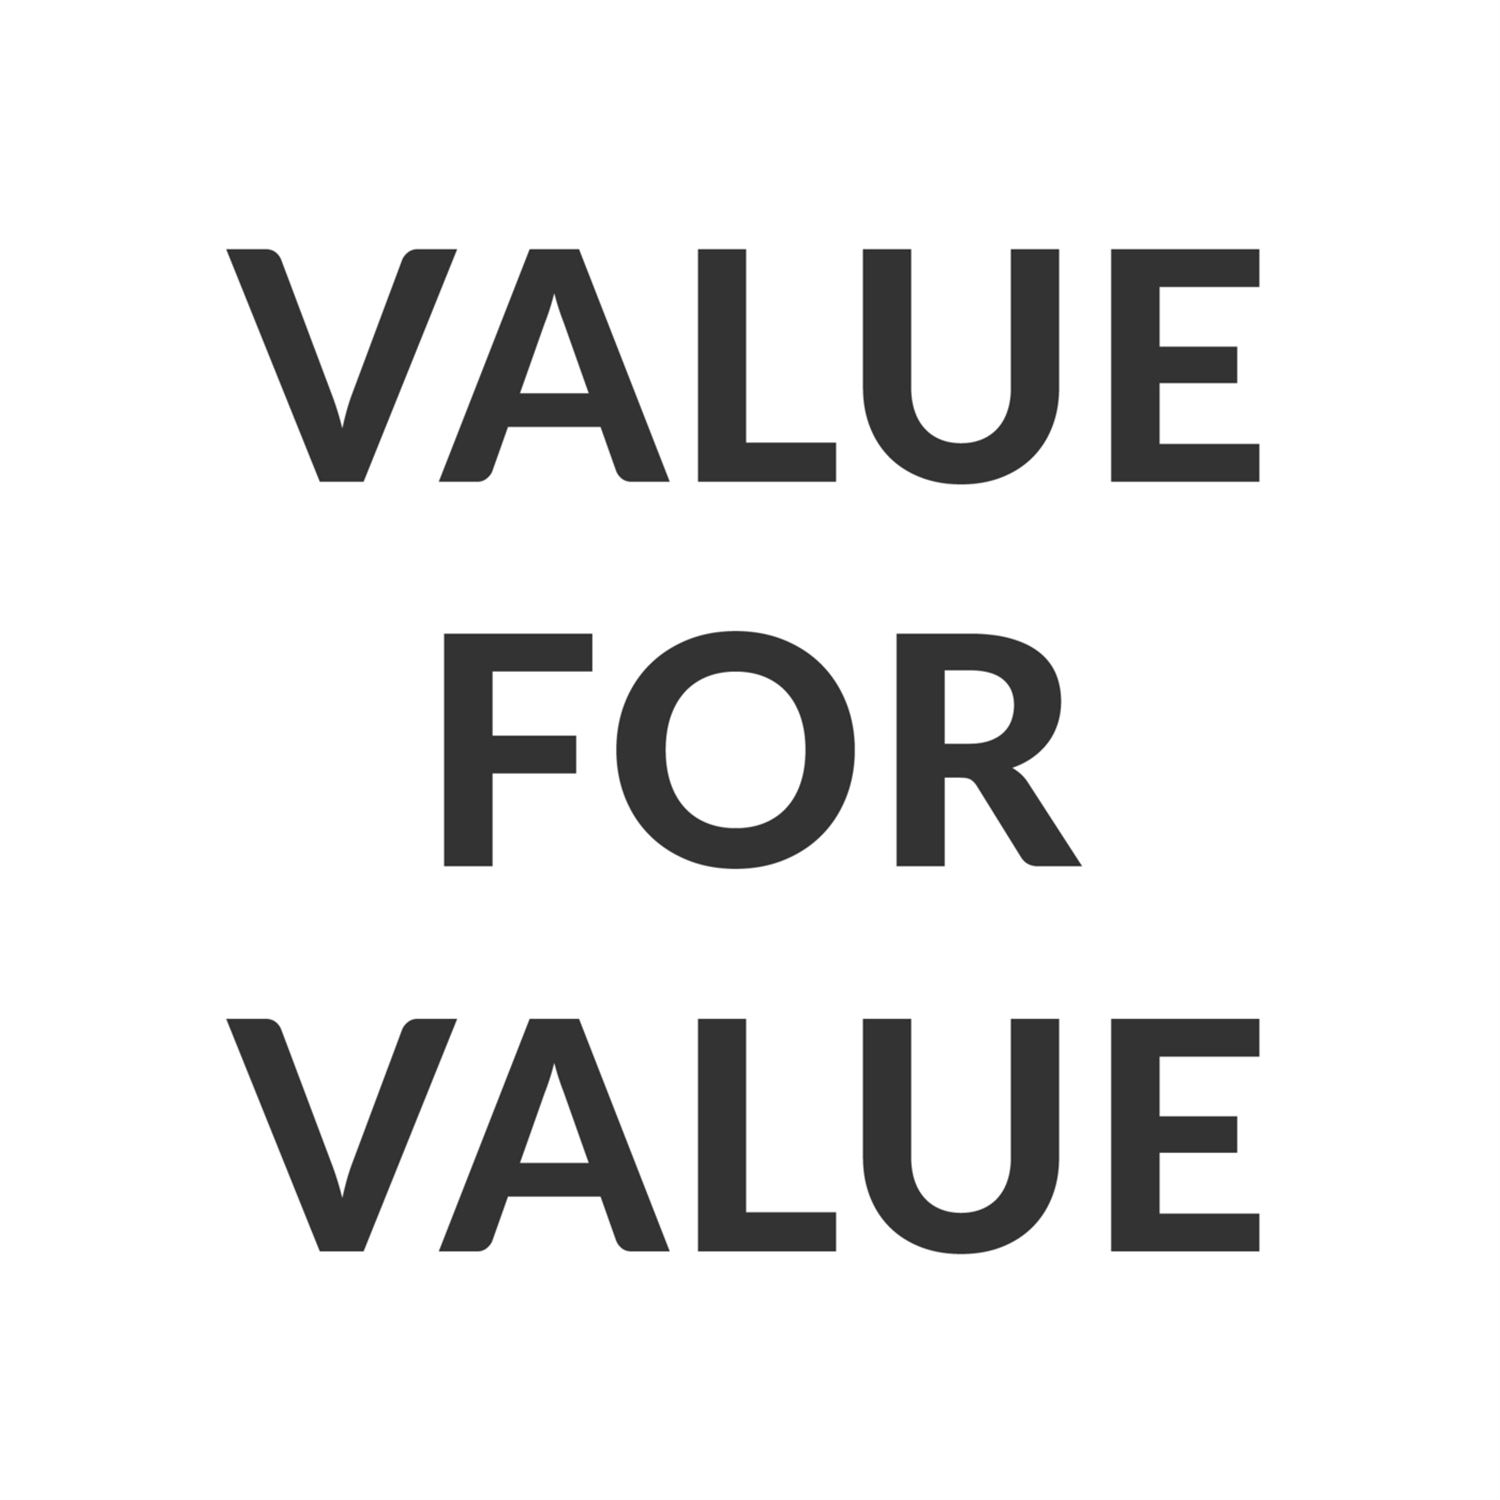 What is the value for value model?